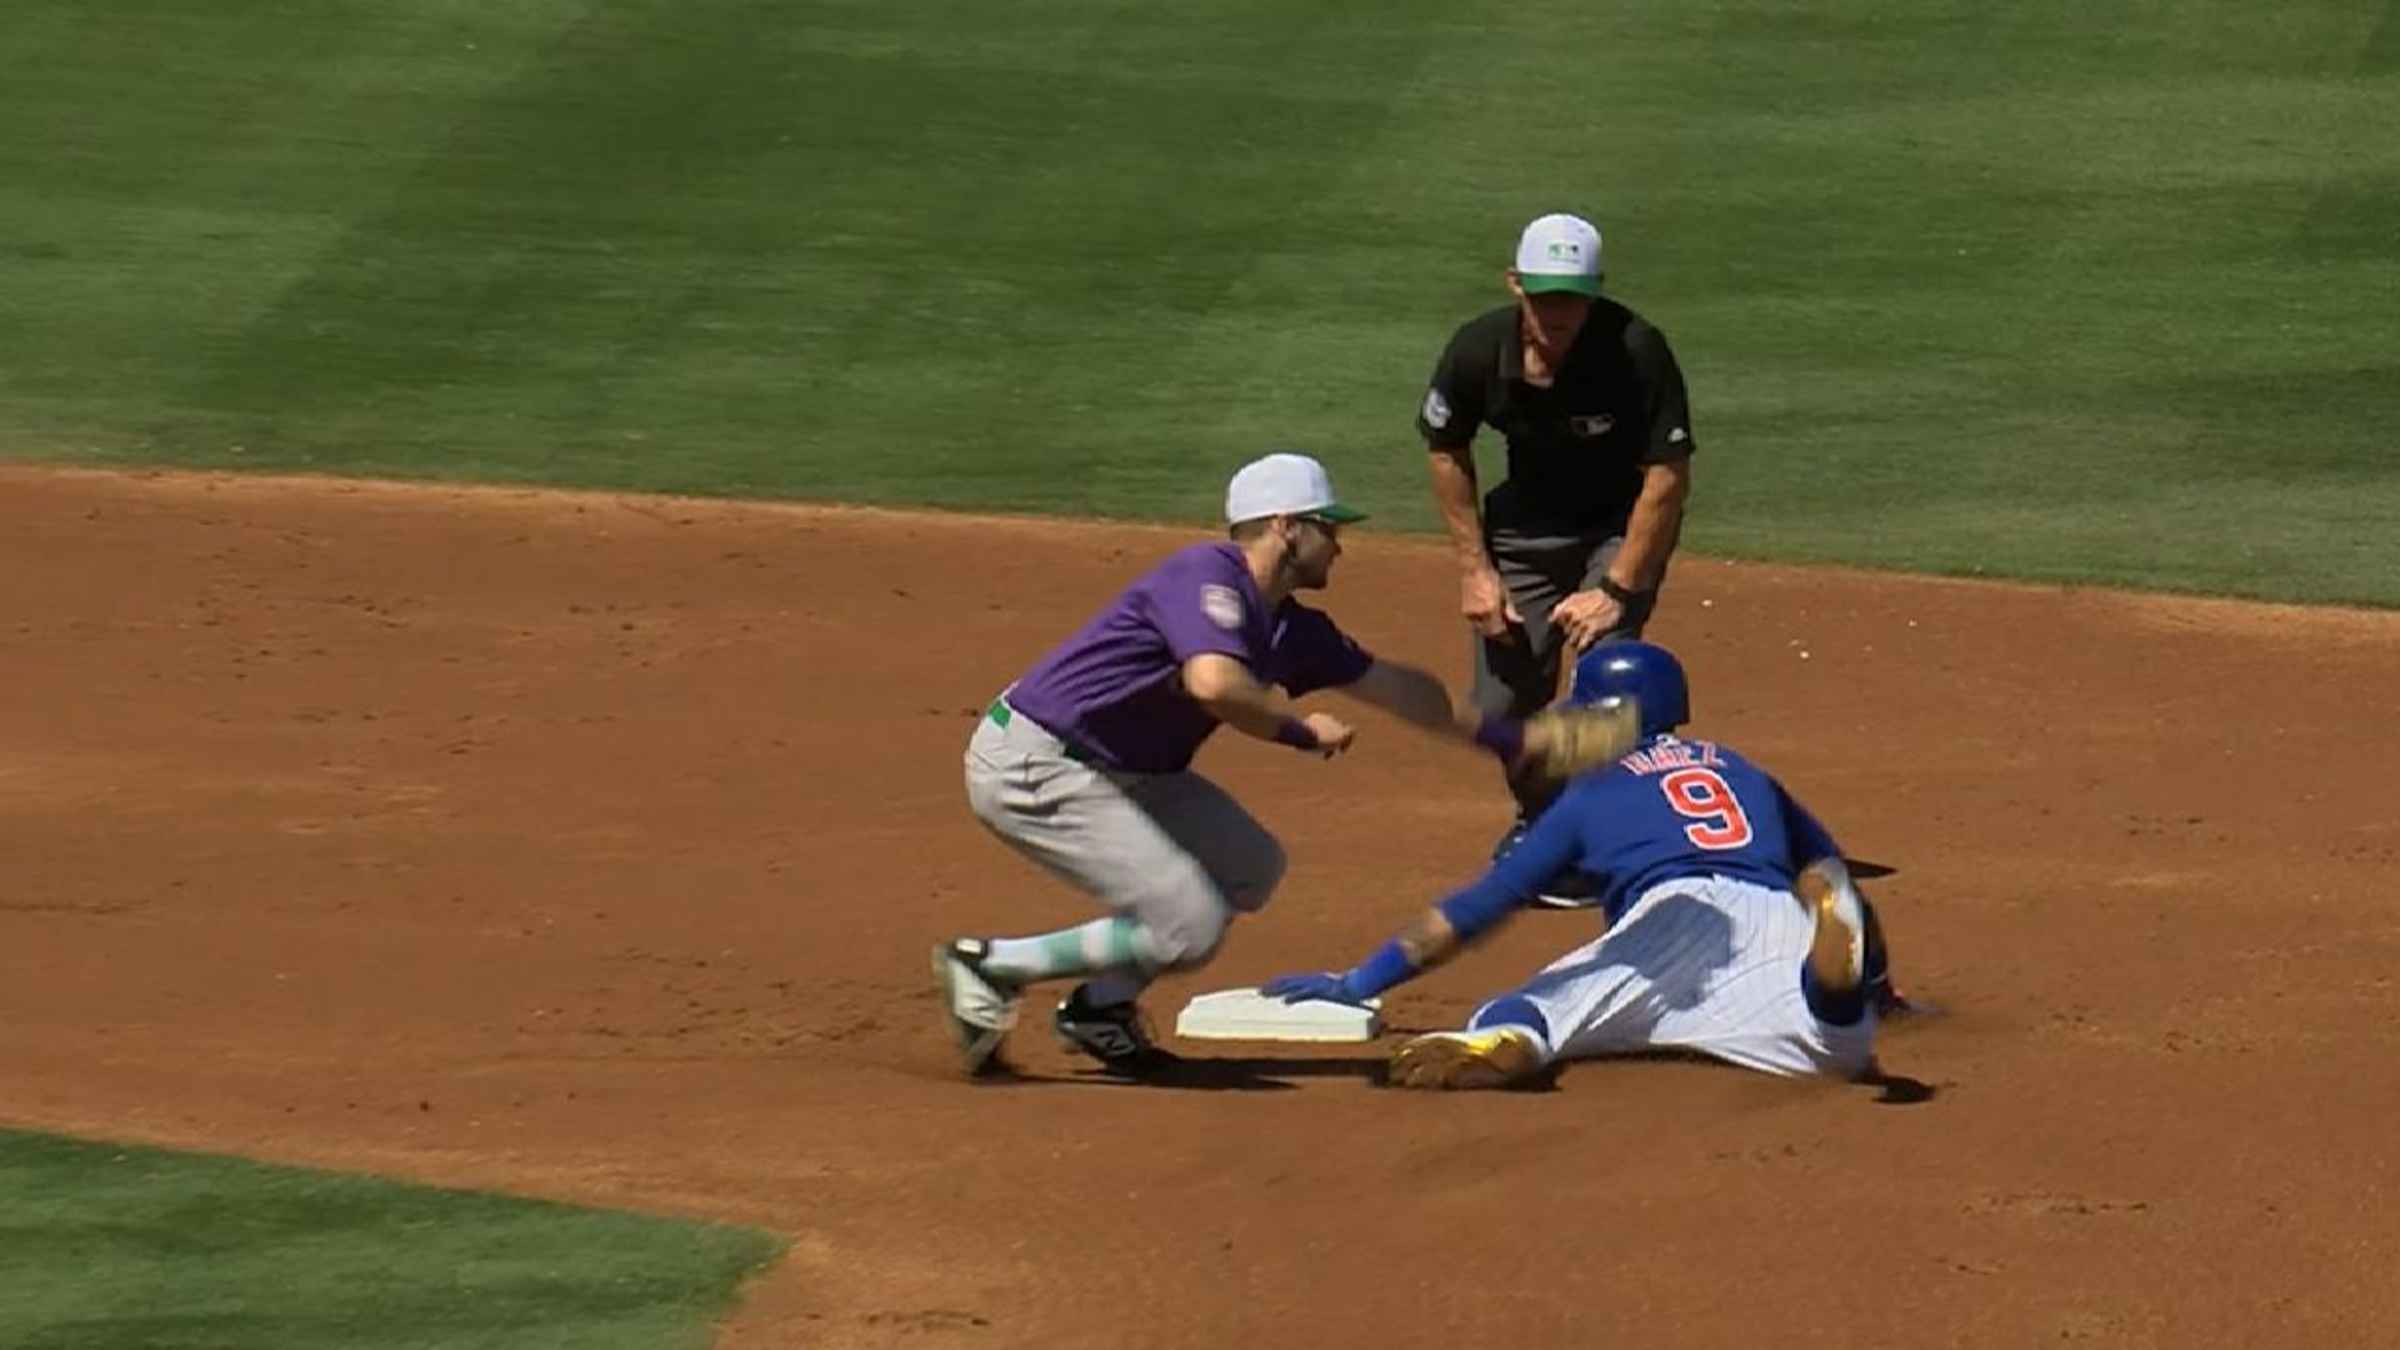 Javier Baez made an unreal slide dodge to steal third during WBC